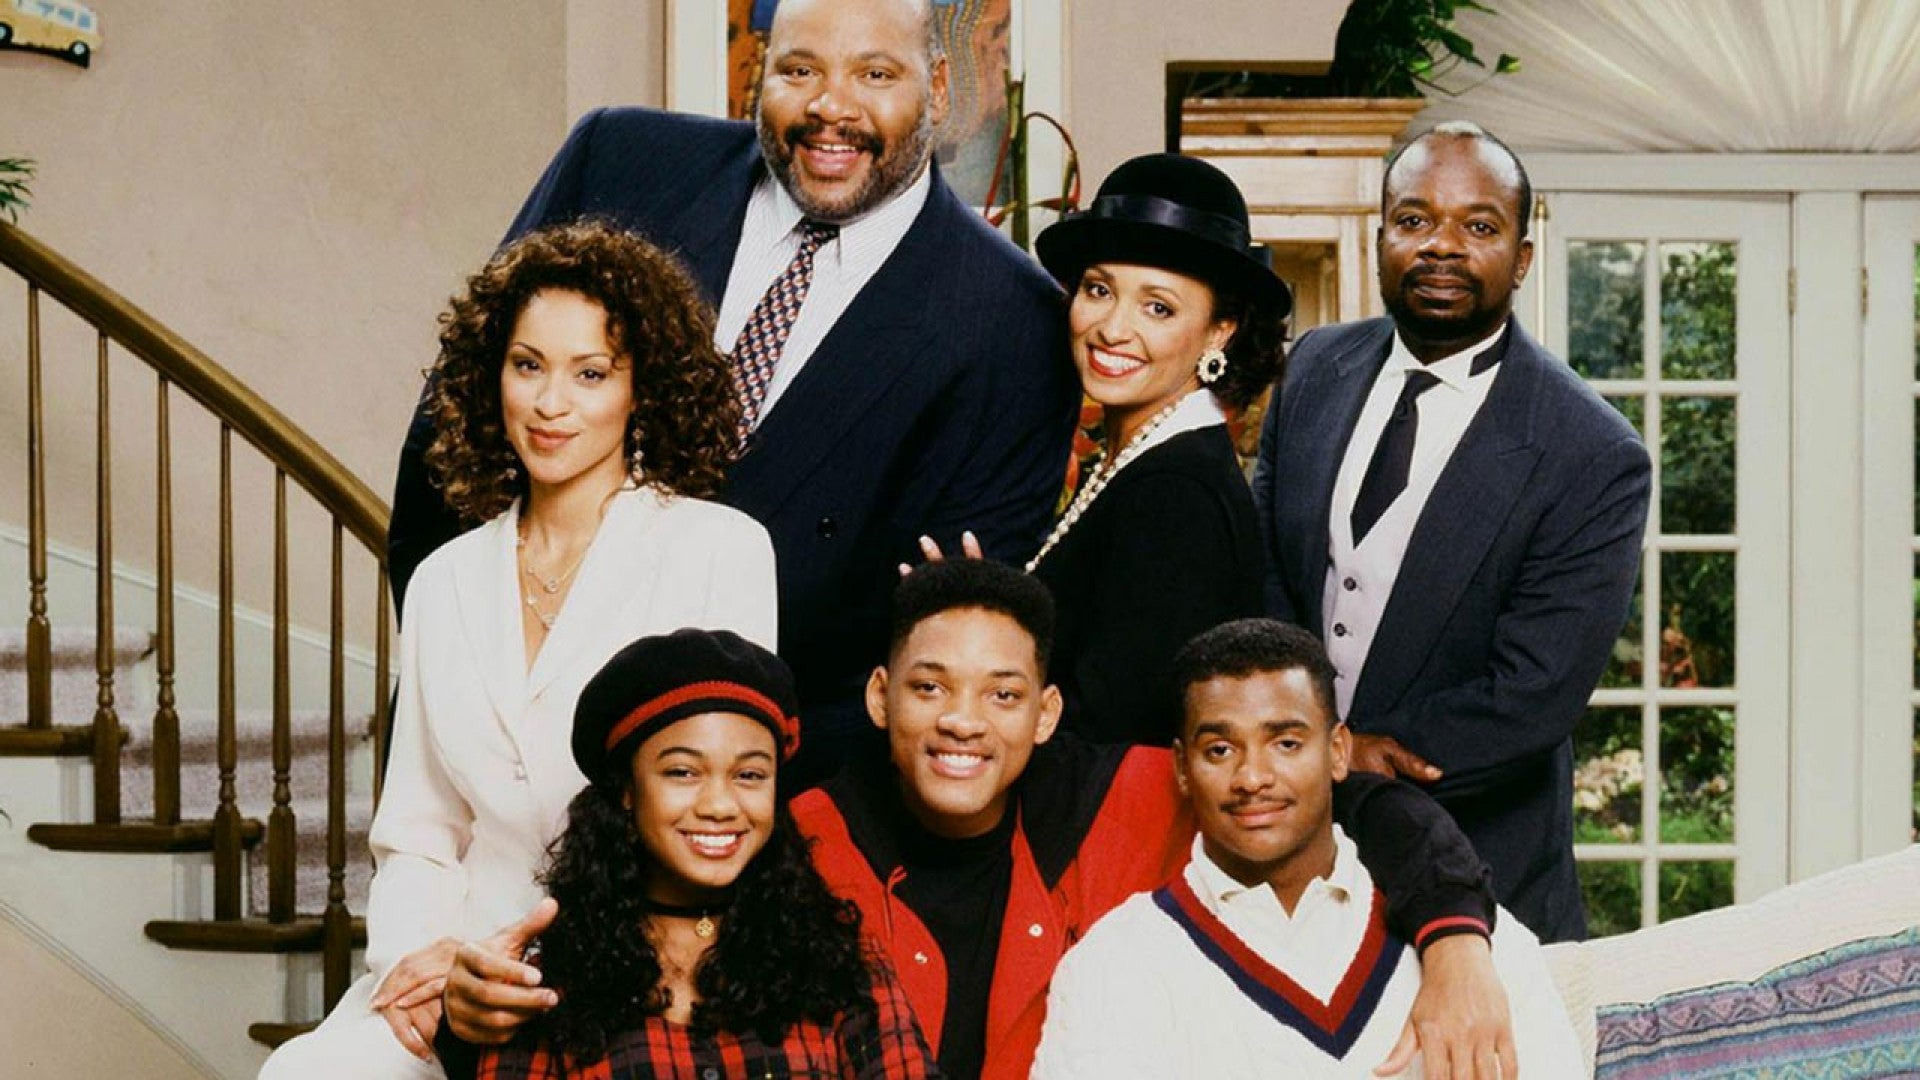 Show The Fresh Prince of Bel-Air